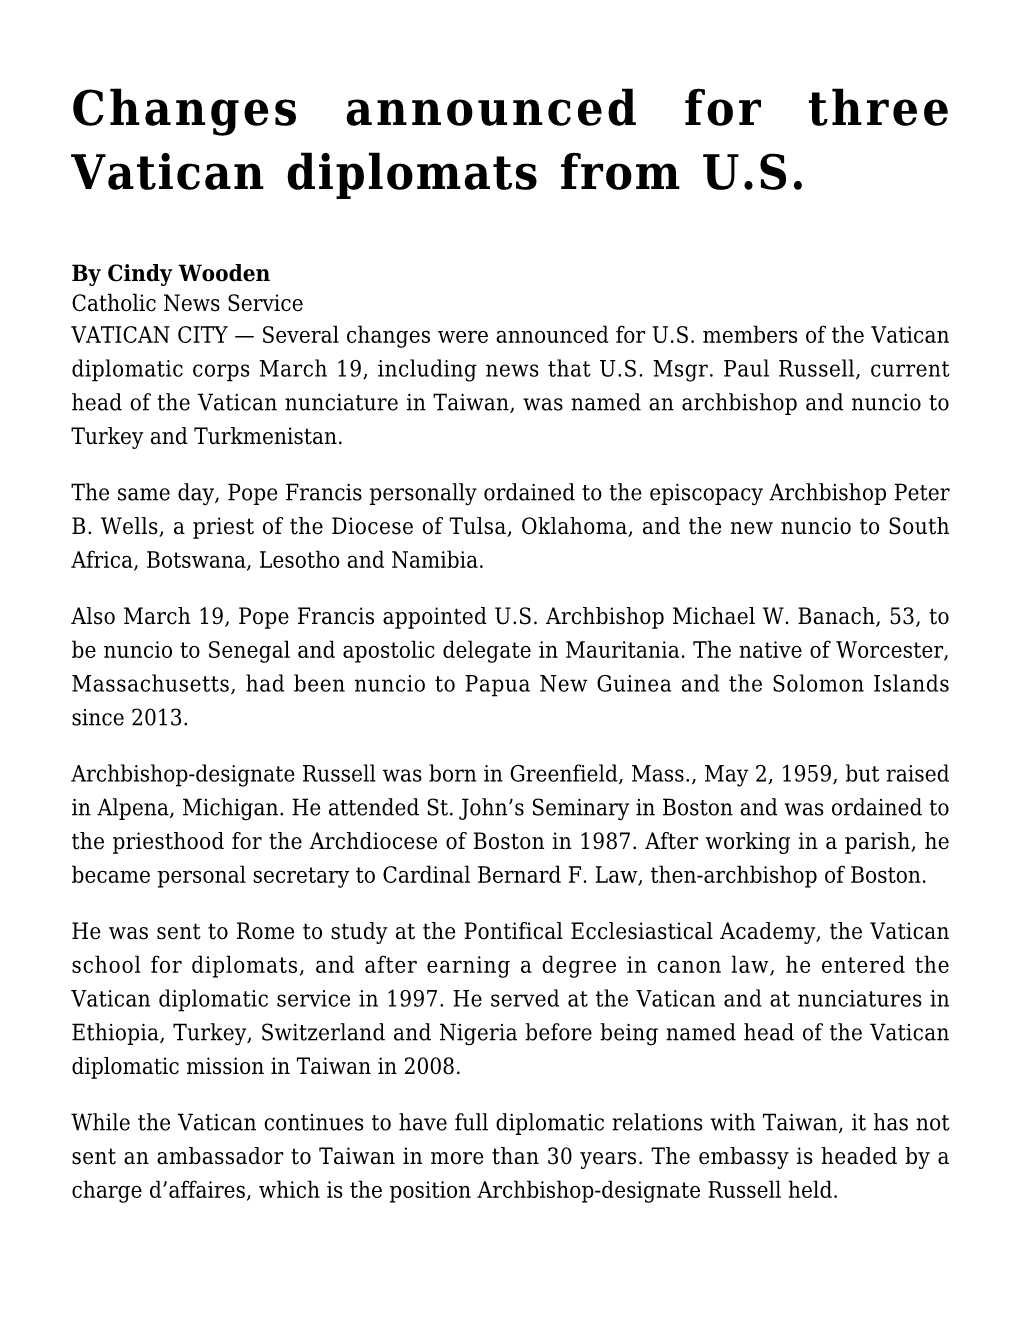 Changes Announced for Three Vatican Diplomats from U.S